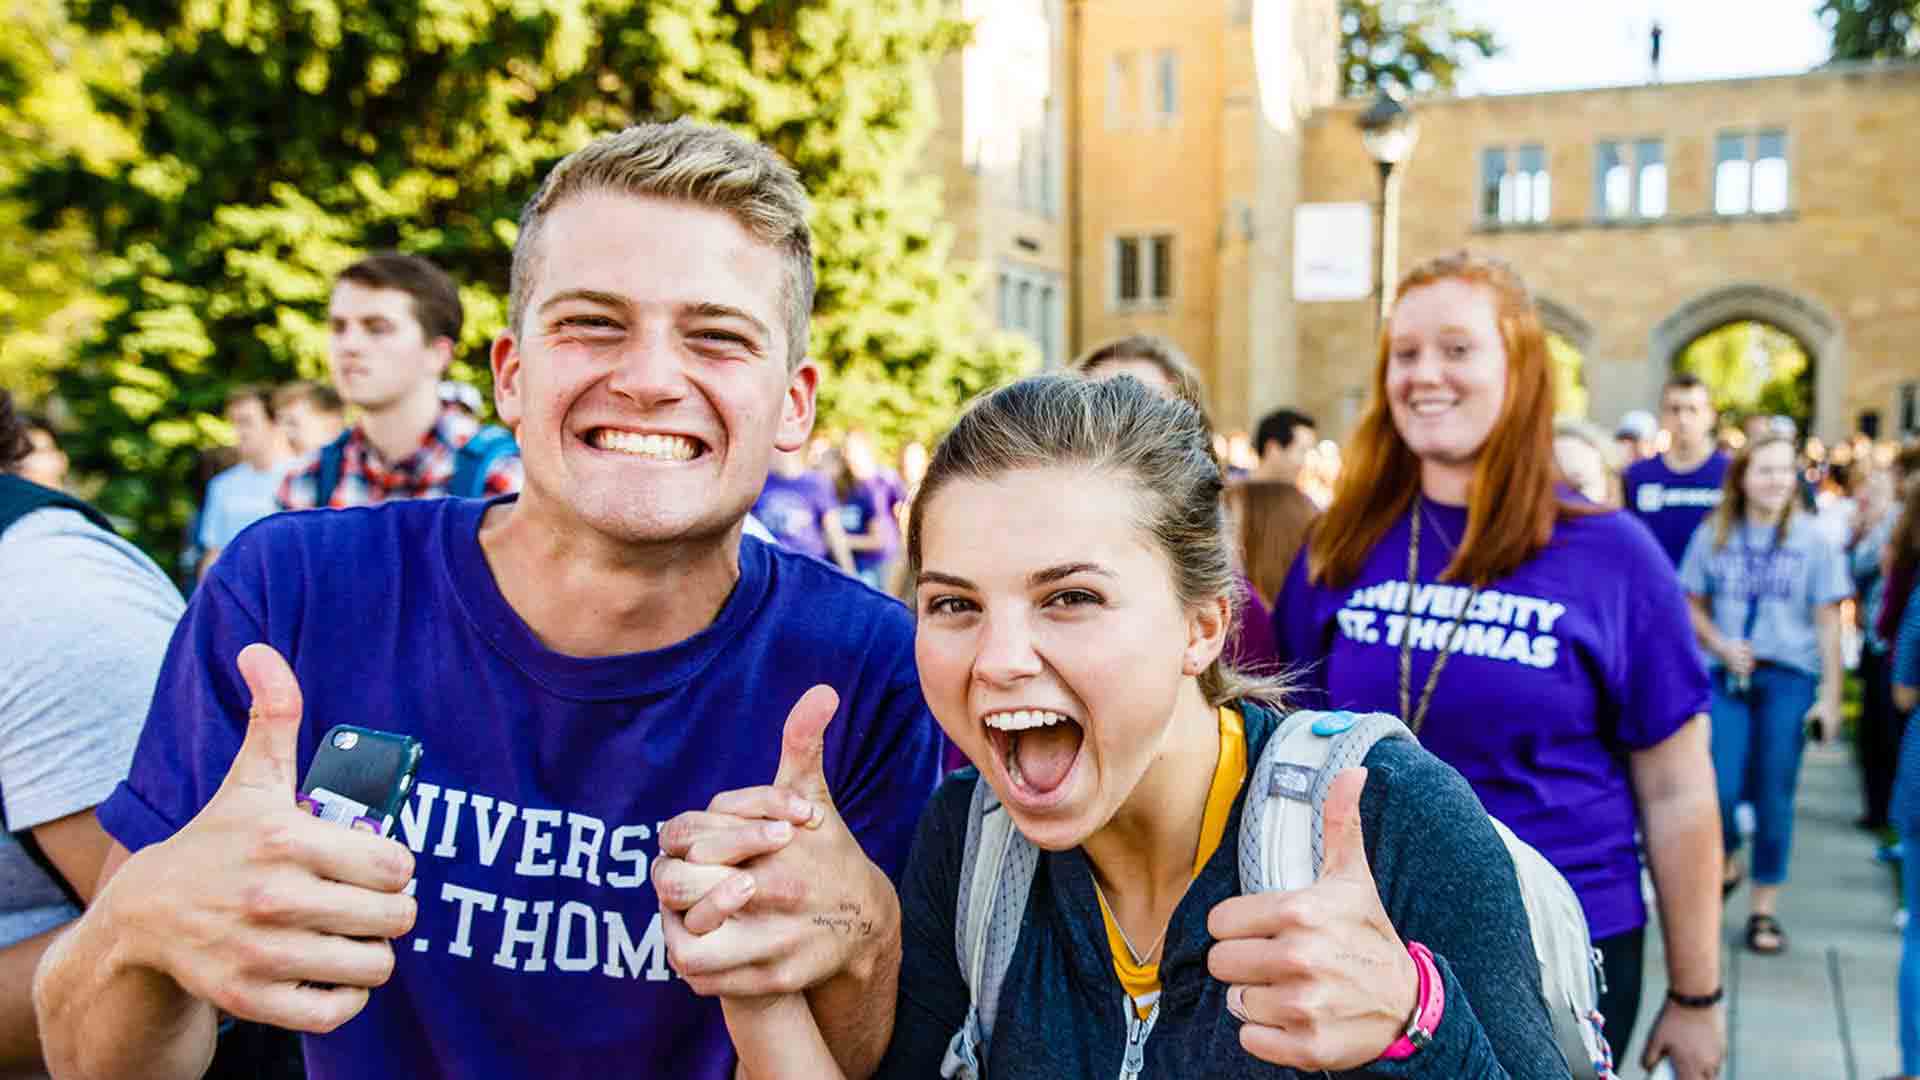 Students smile for the camera during the March Through the Arches in September.